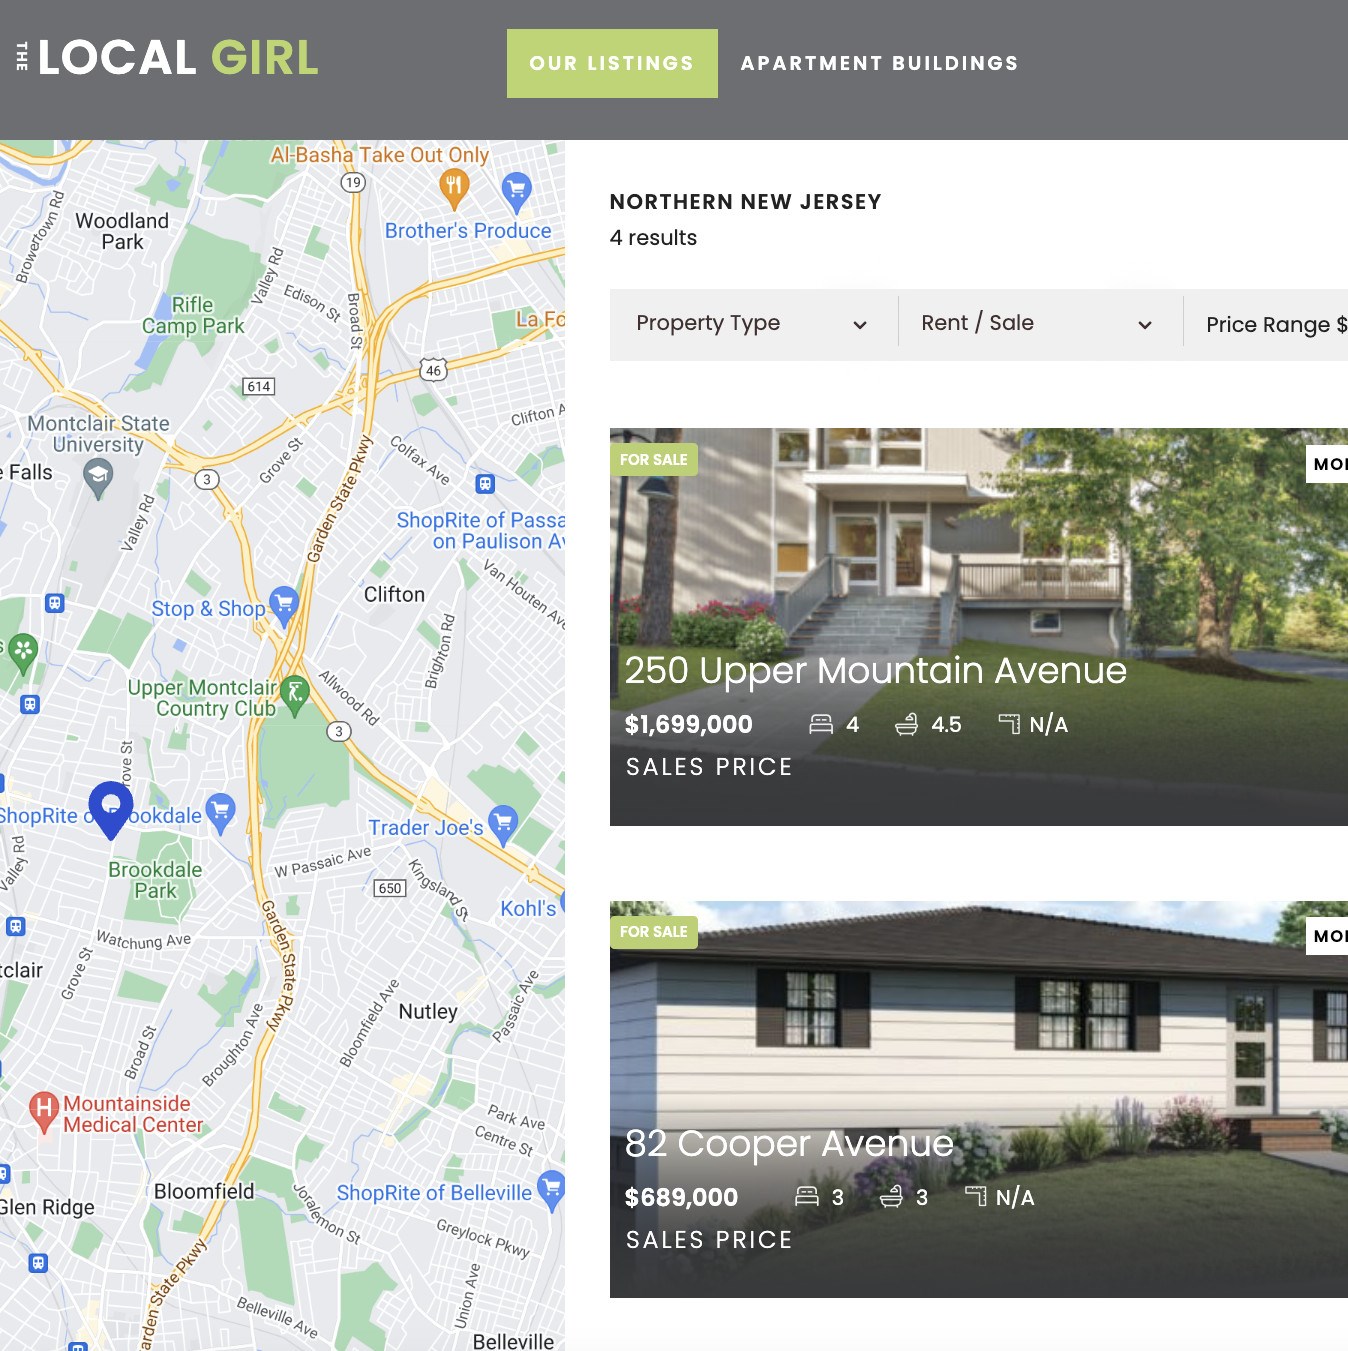 The Local Girl Real Estate Directory